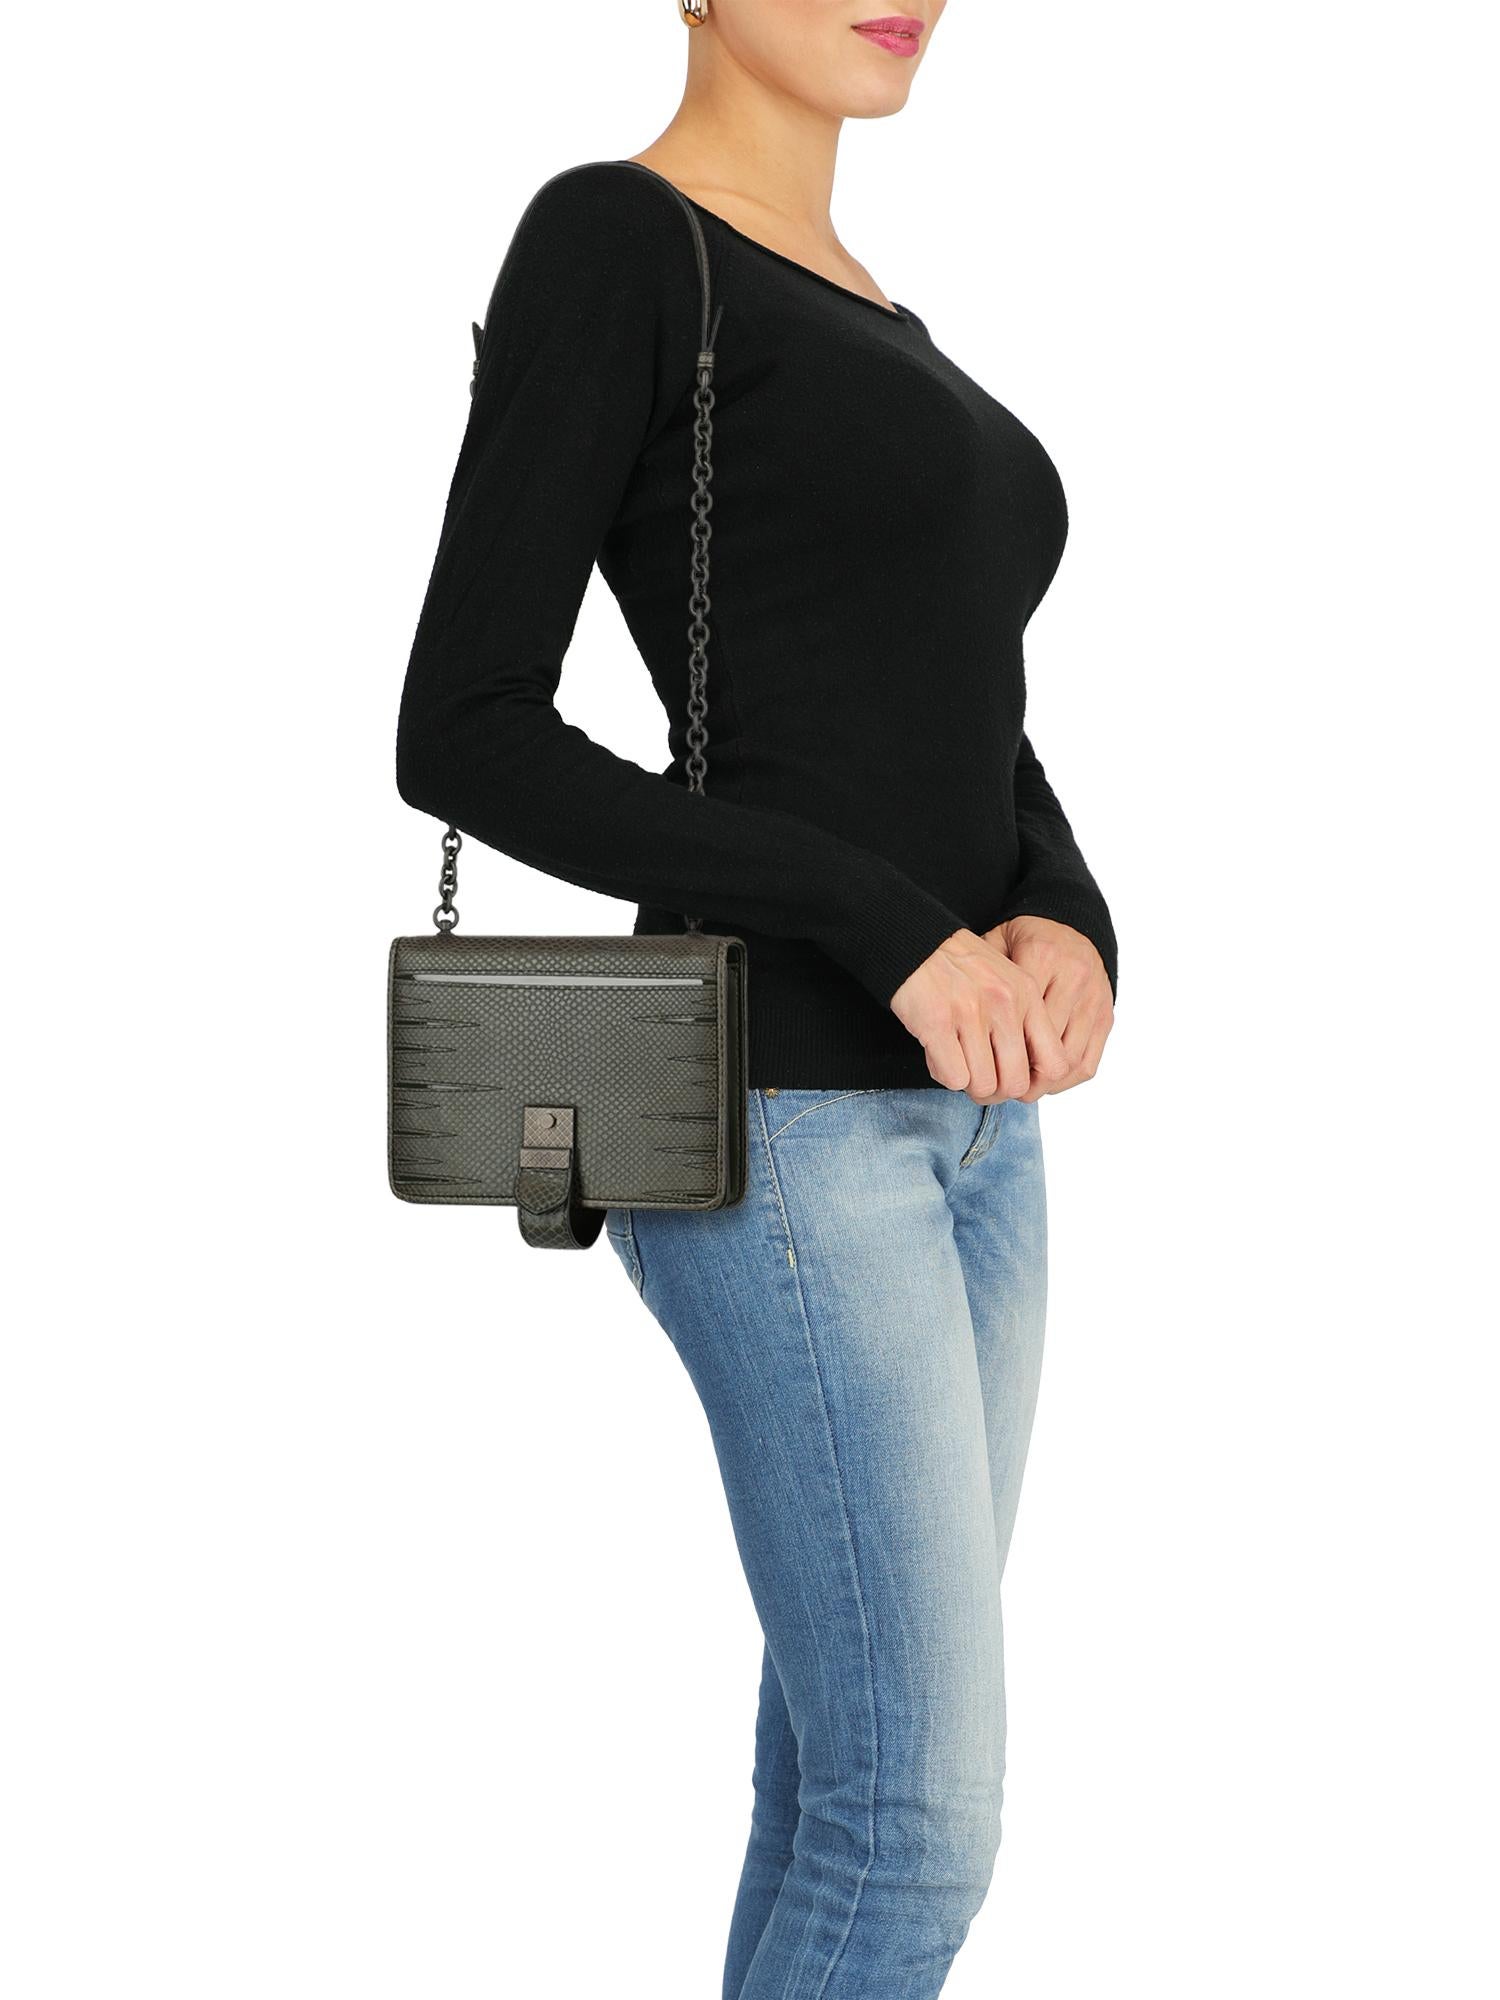 Shoulder bag, leather, solid color, internal logo, pressure lock closure, chain shoulder strap, ruthenium hardware, internal mirror, multiple internal compartments, suede lining, cut-out details, evening, mini bag. Product Condition: Like New With